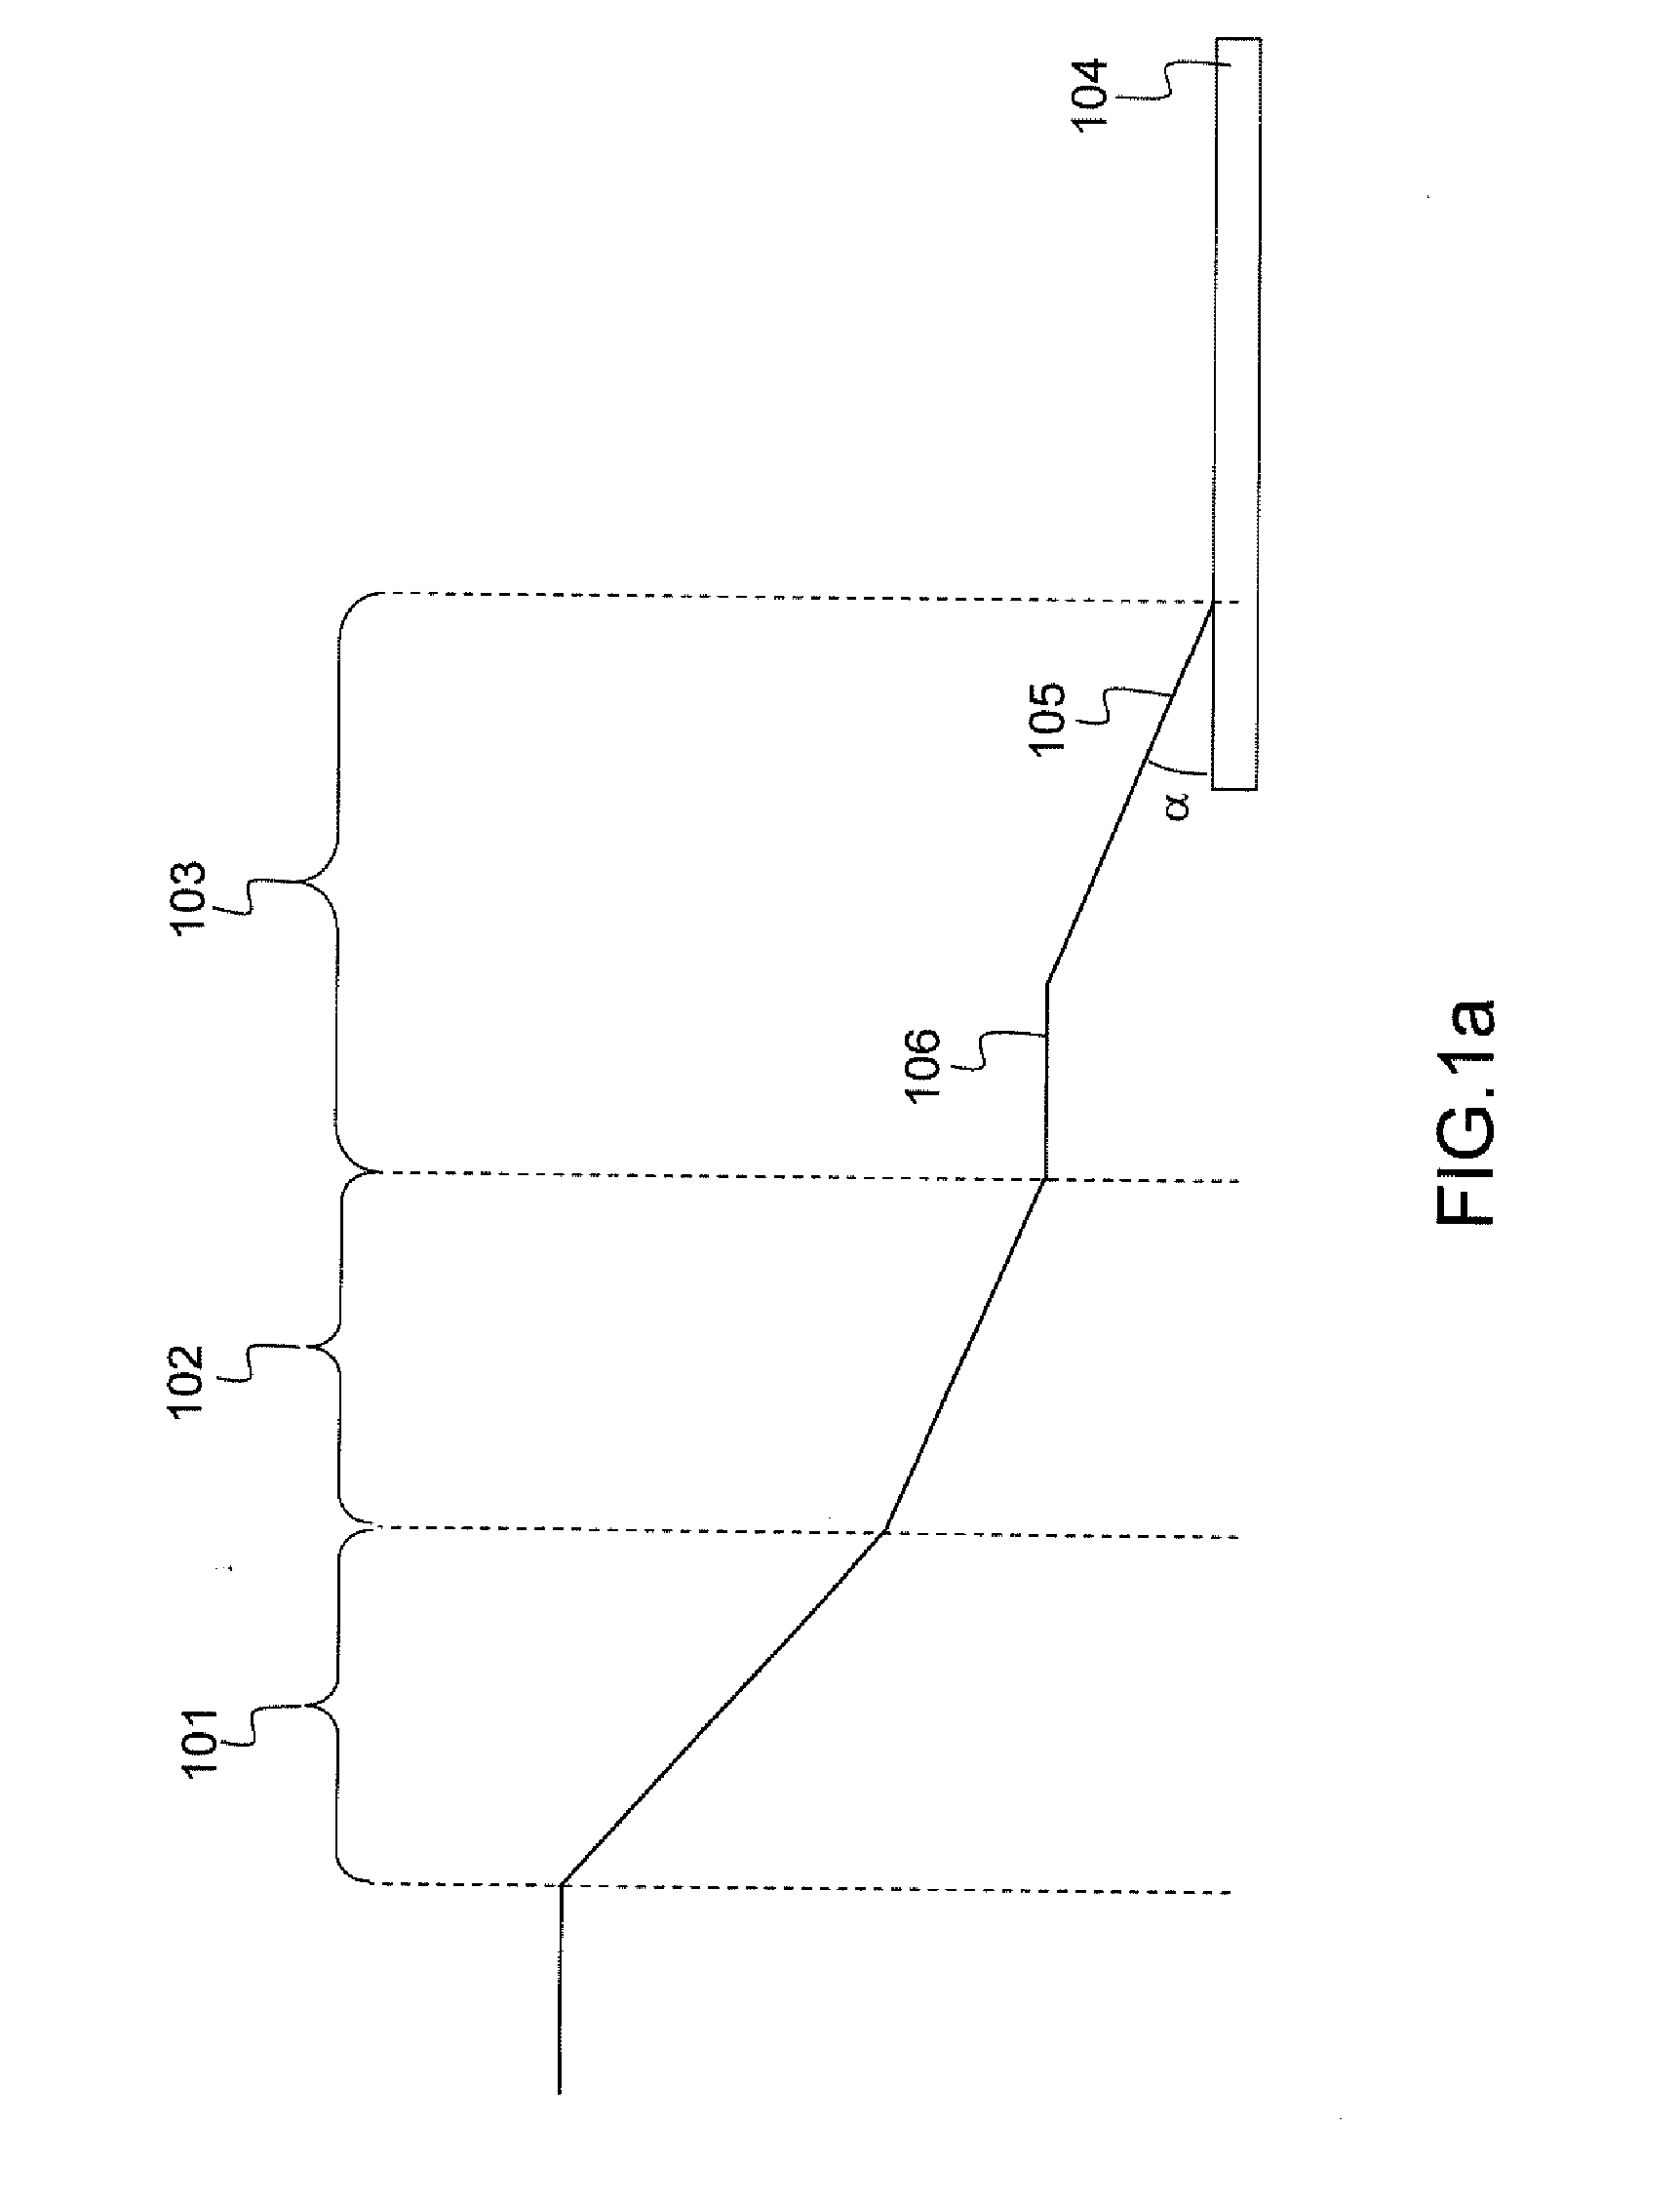 Method for calculating an approach trajectory of an aircraft to an airport